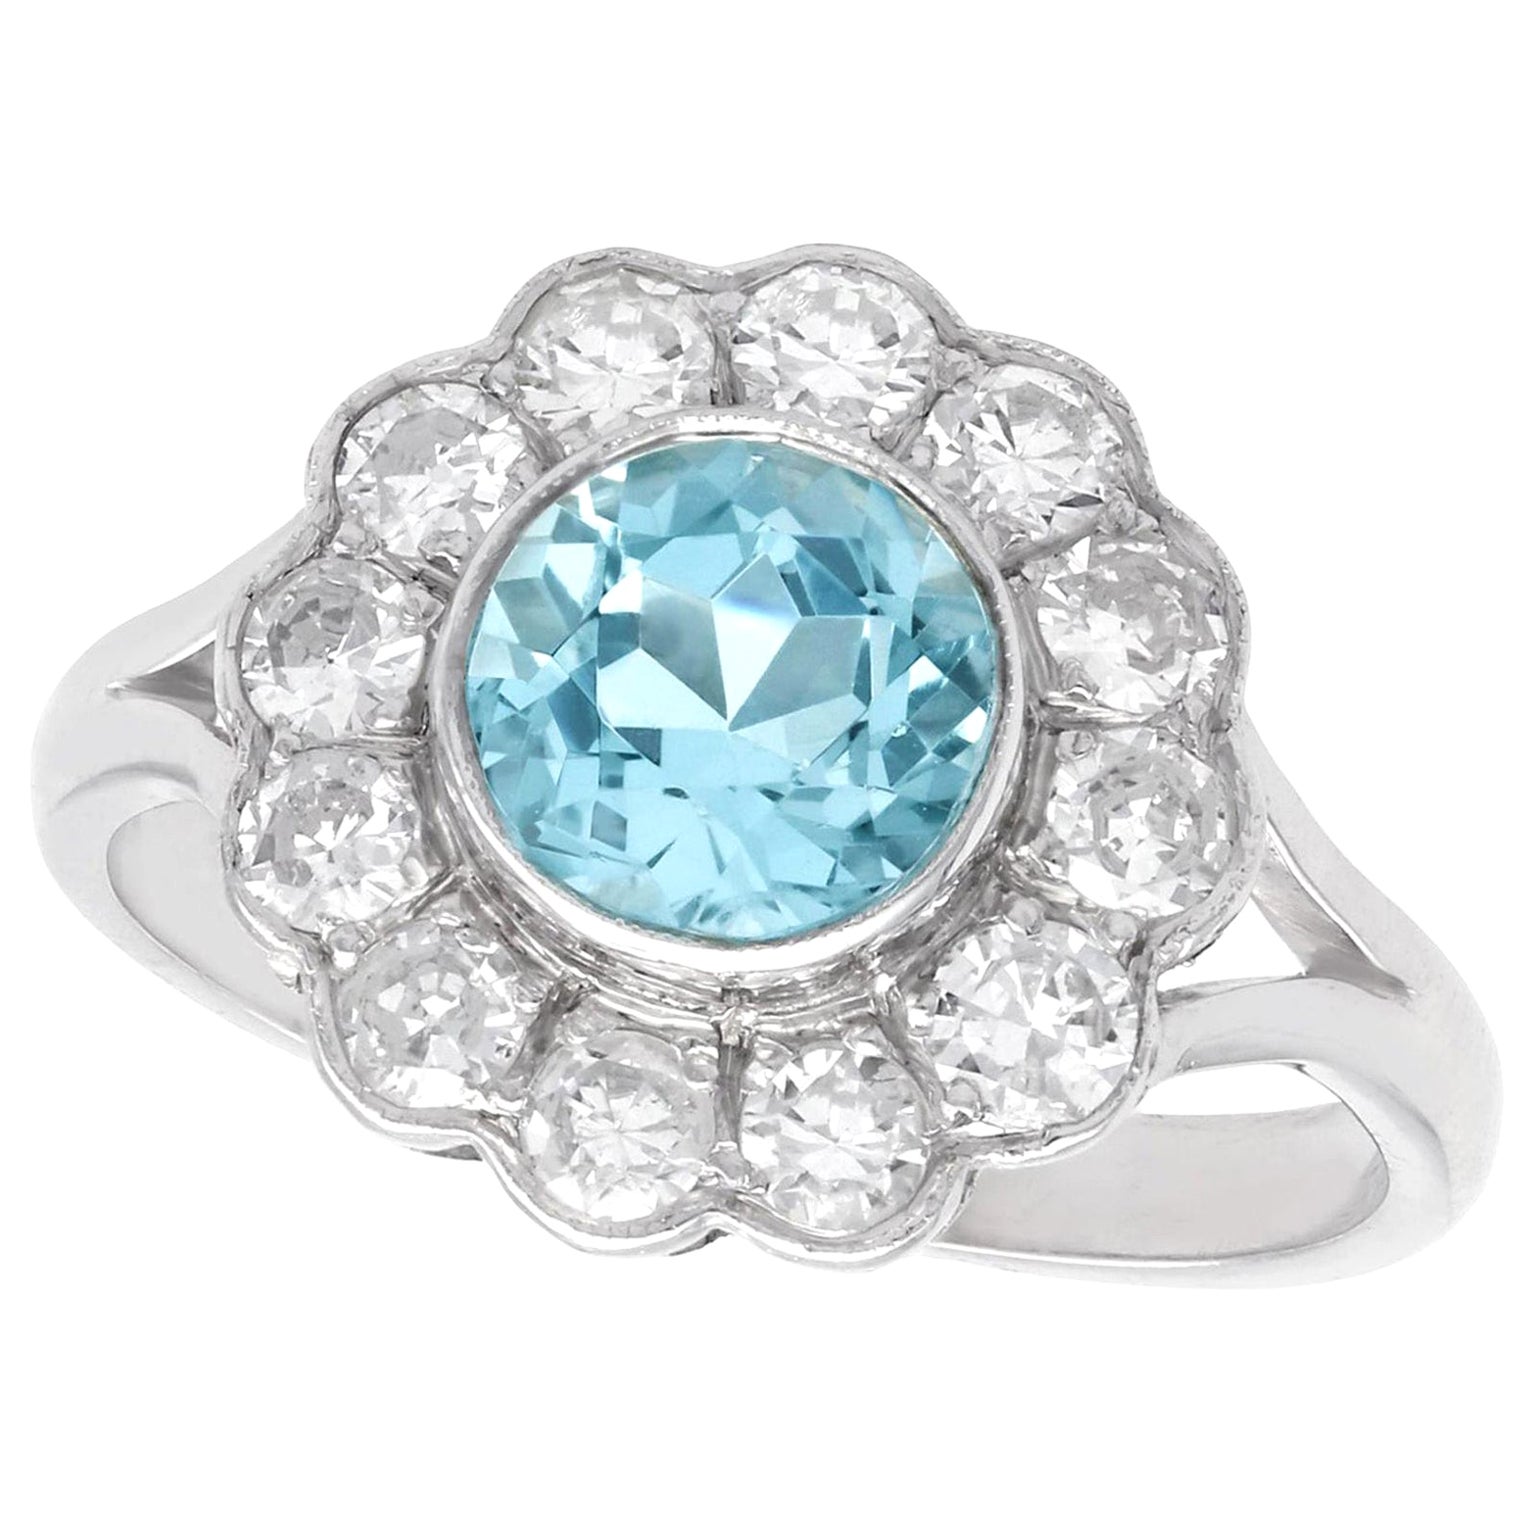 1950s 1.34 Carat Aquamarine and Diamond White Gold Cluster Ring For Sale